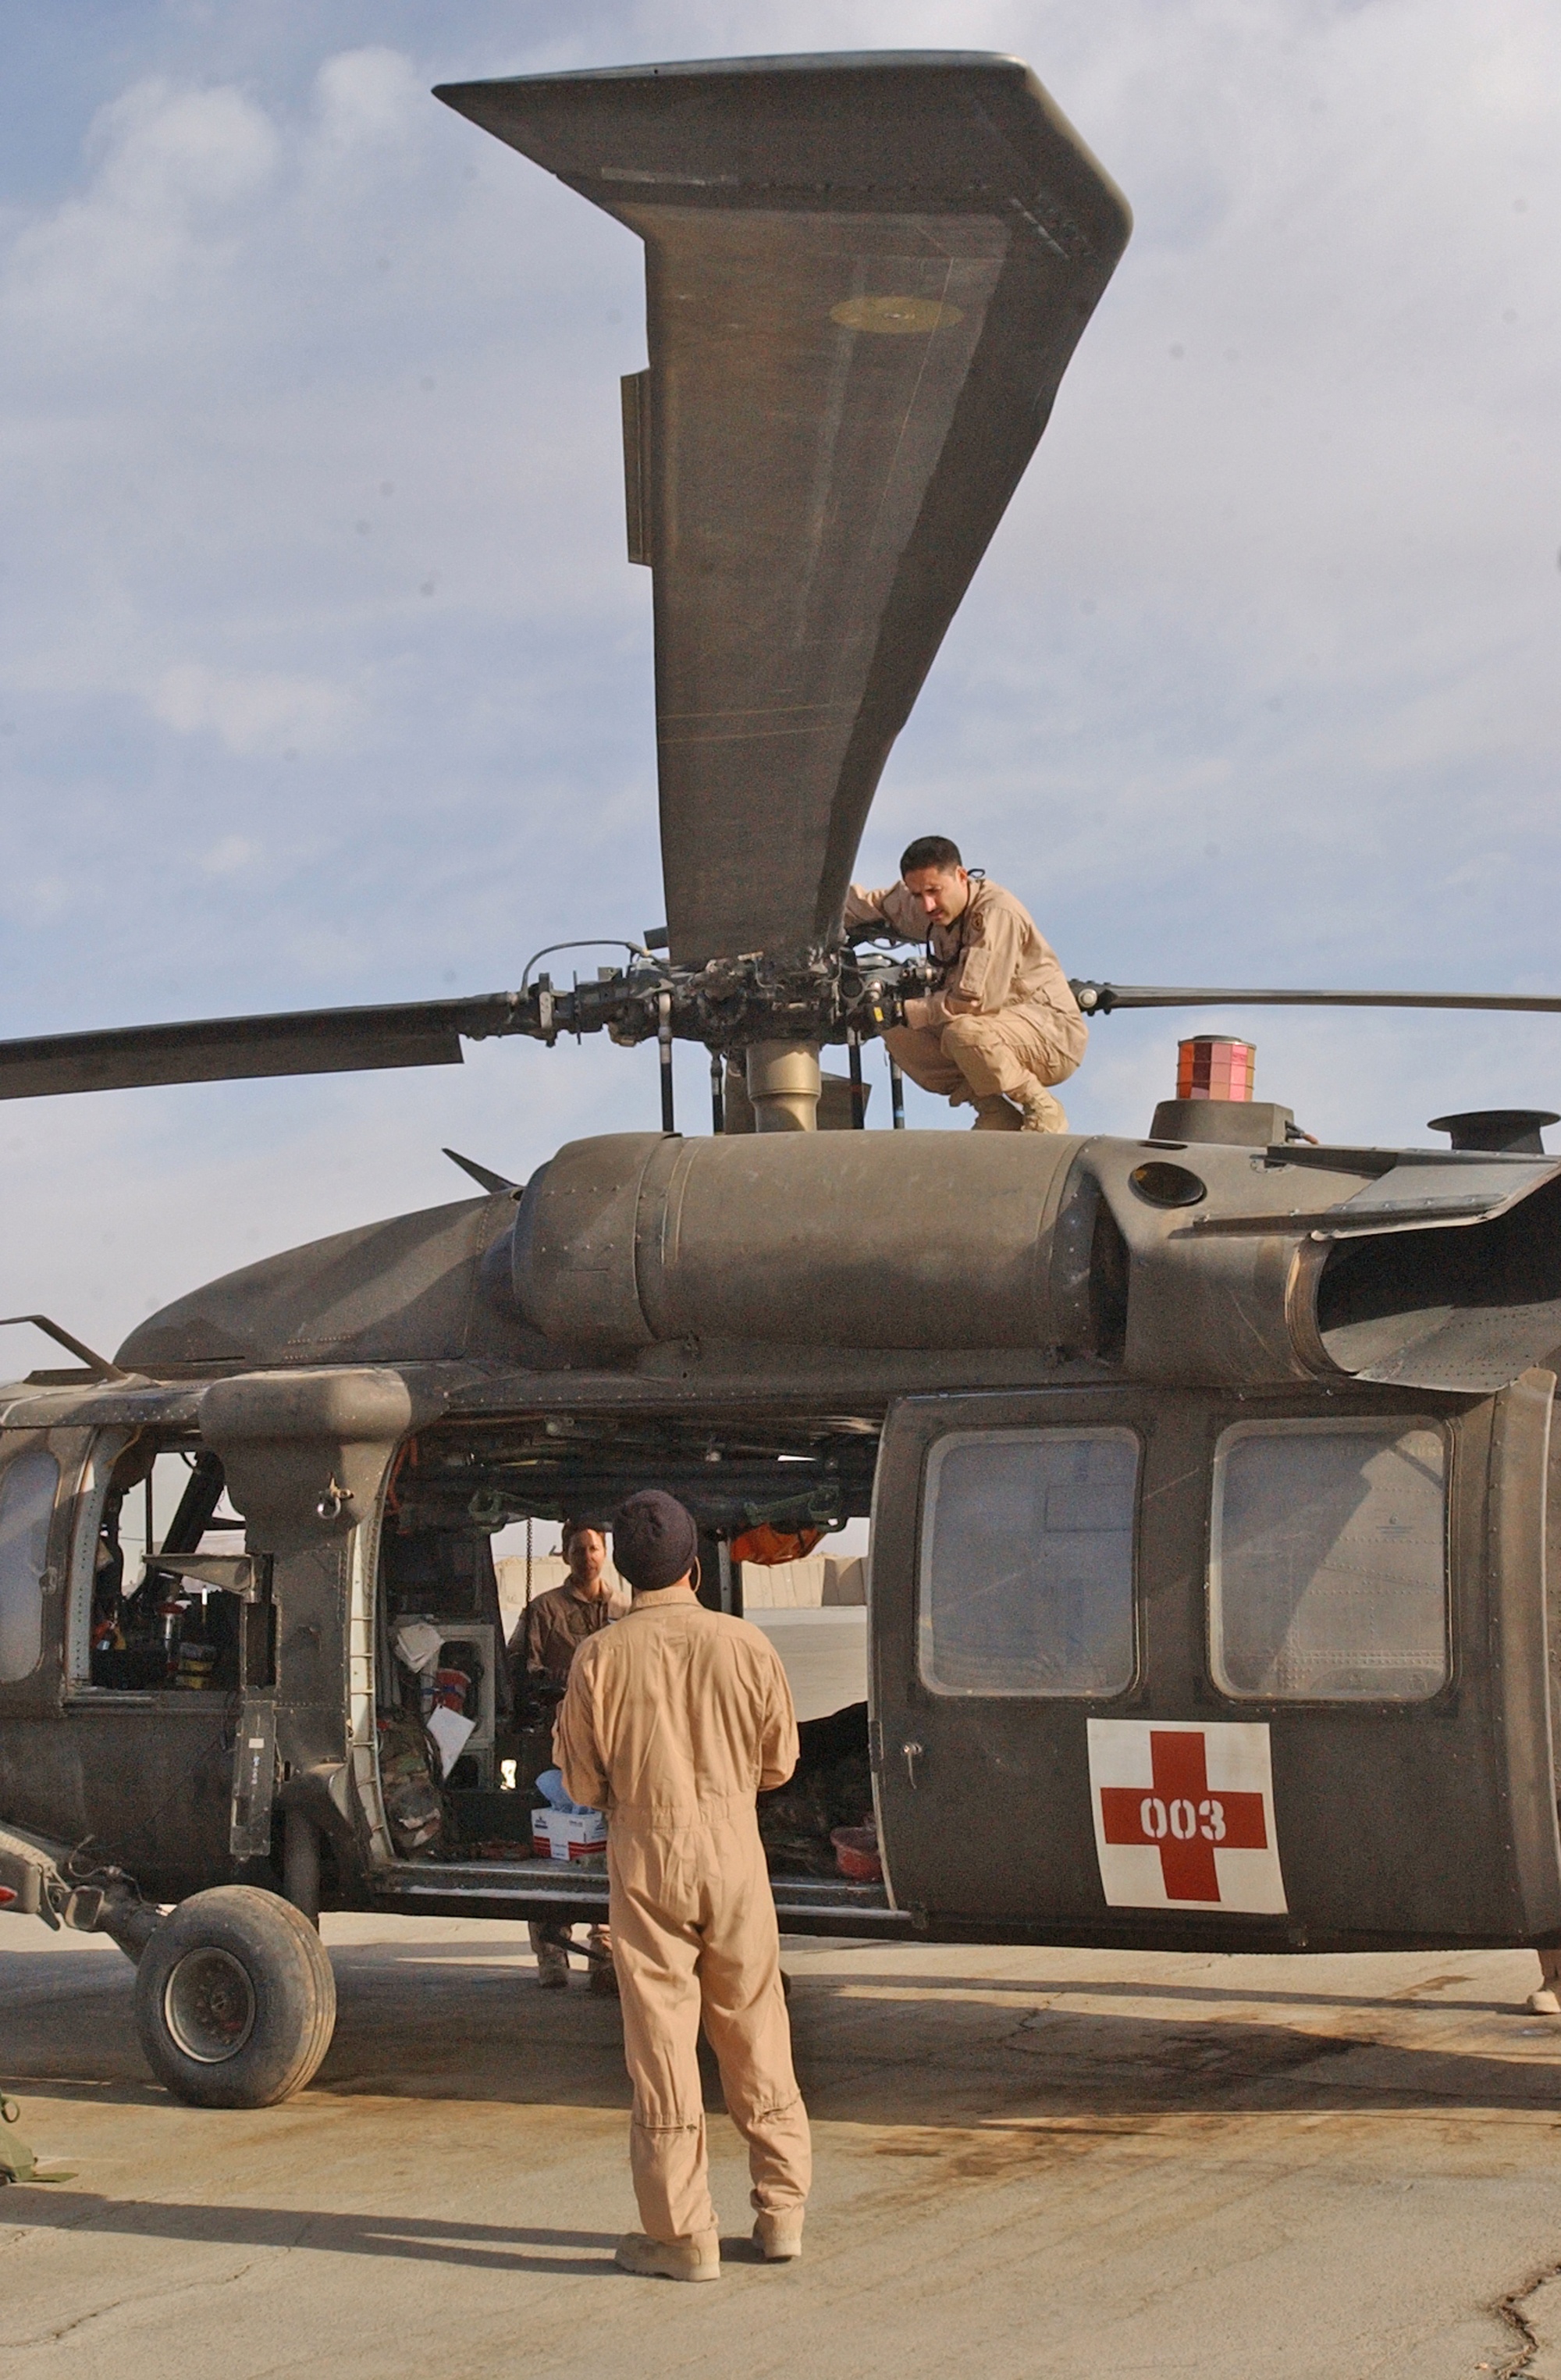 68th Assault Helicopter Company